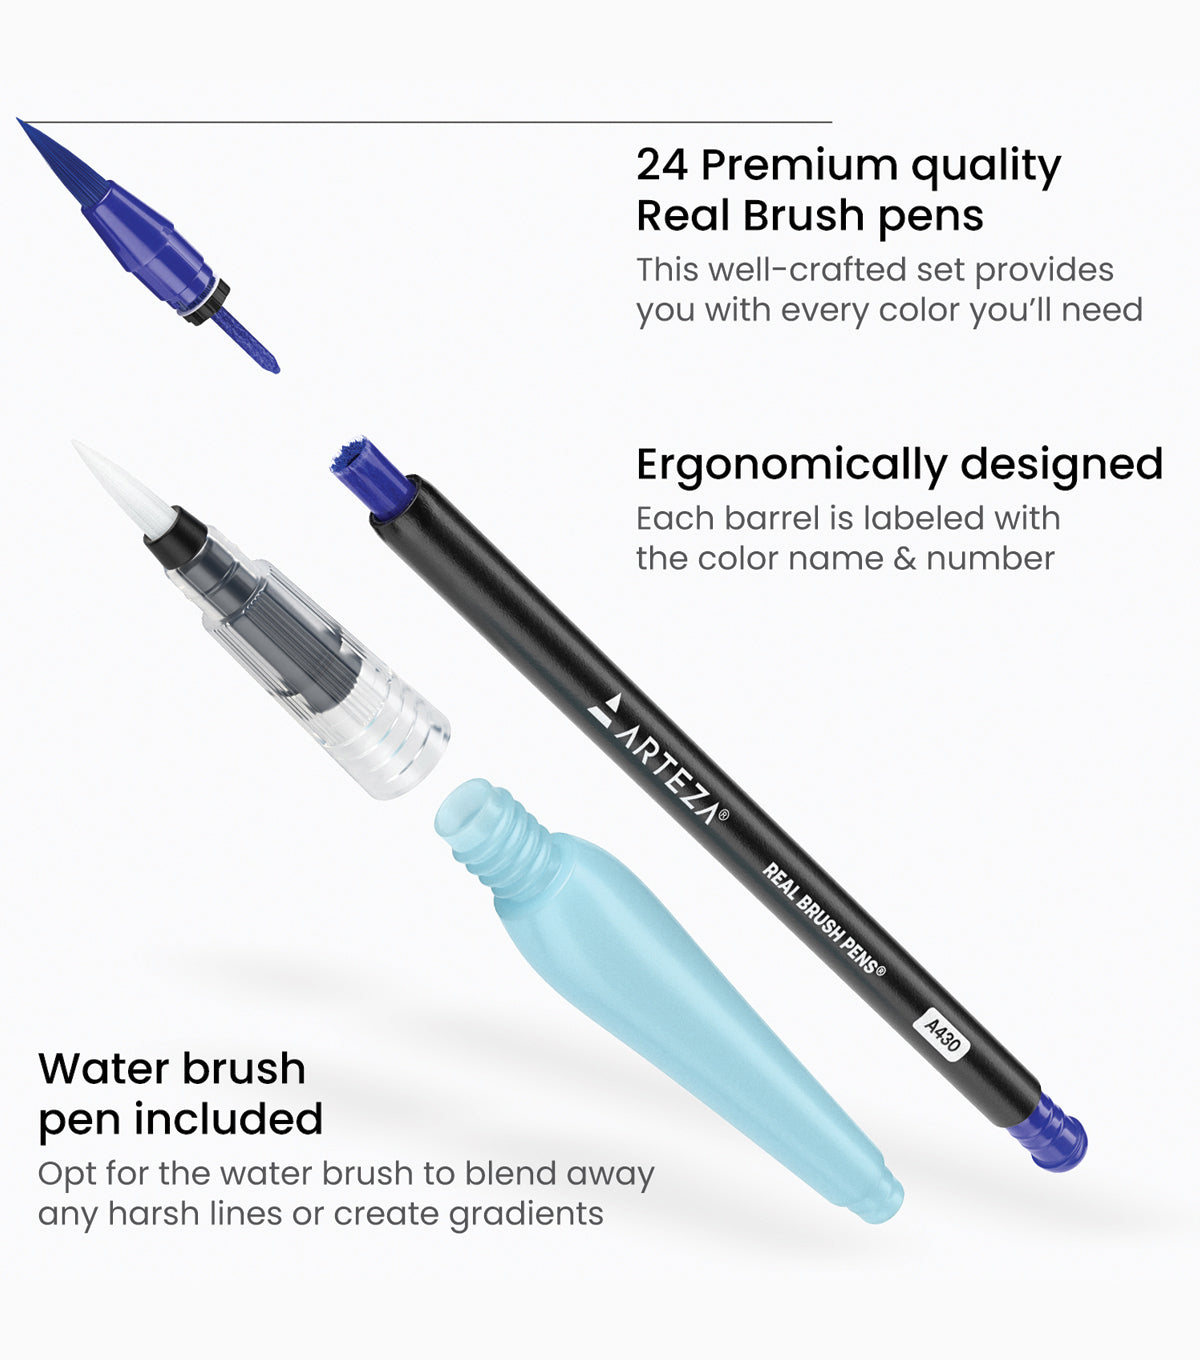 Arteza pens • Compare (68 products) find best prices »